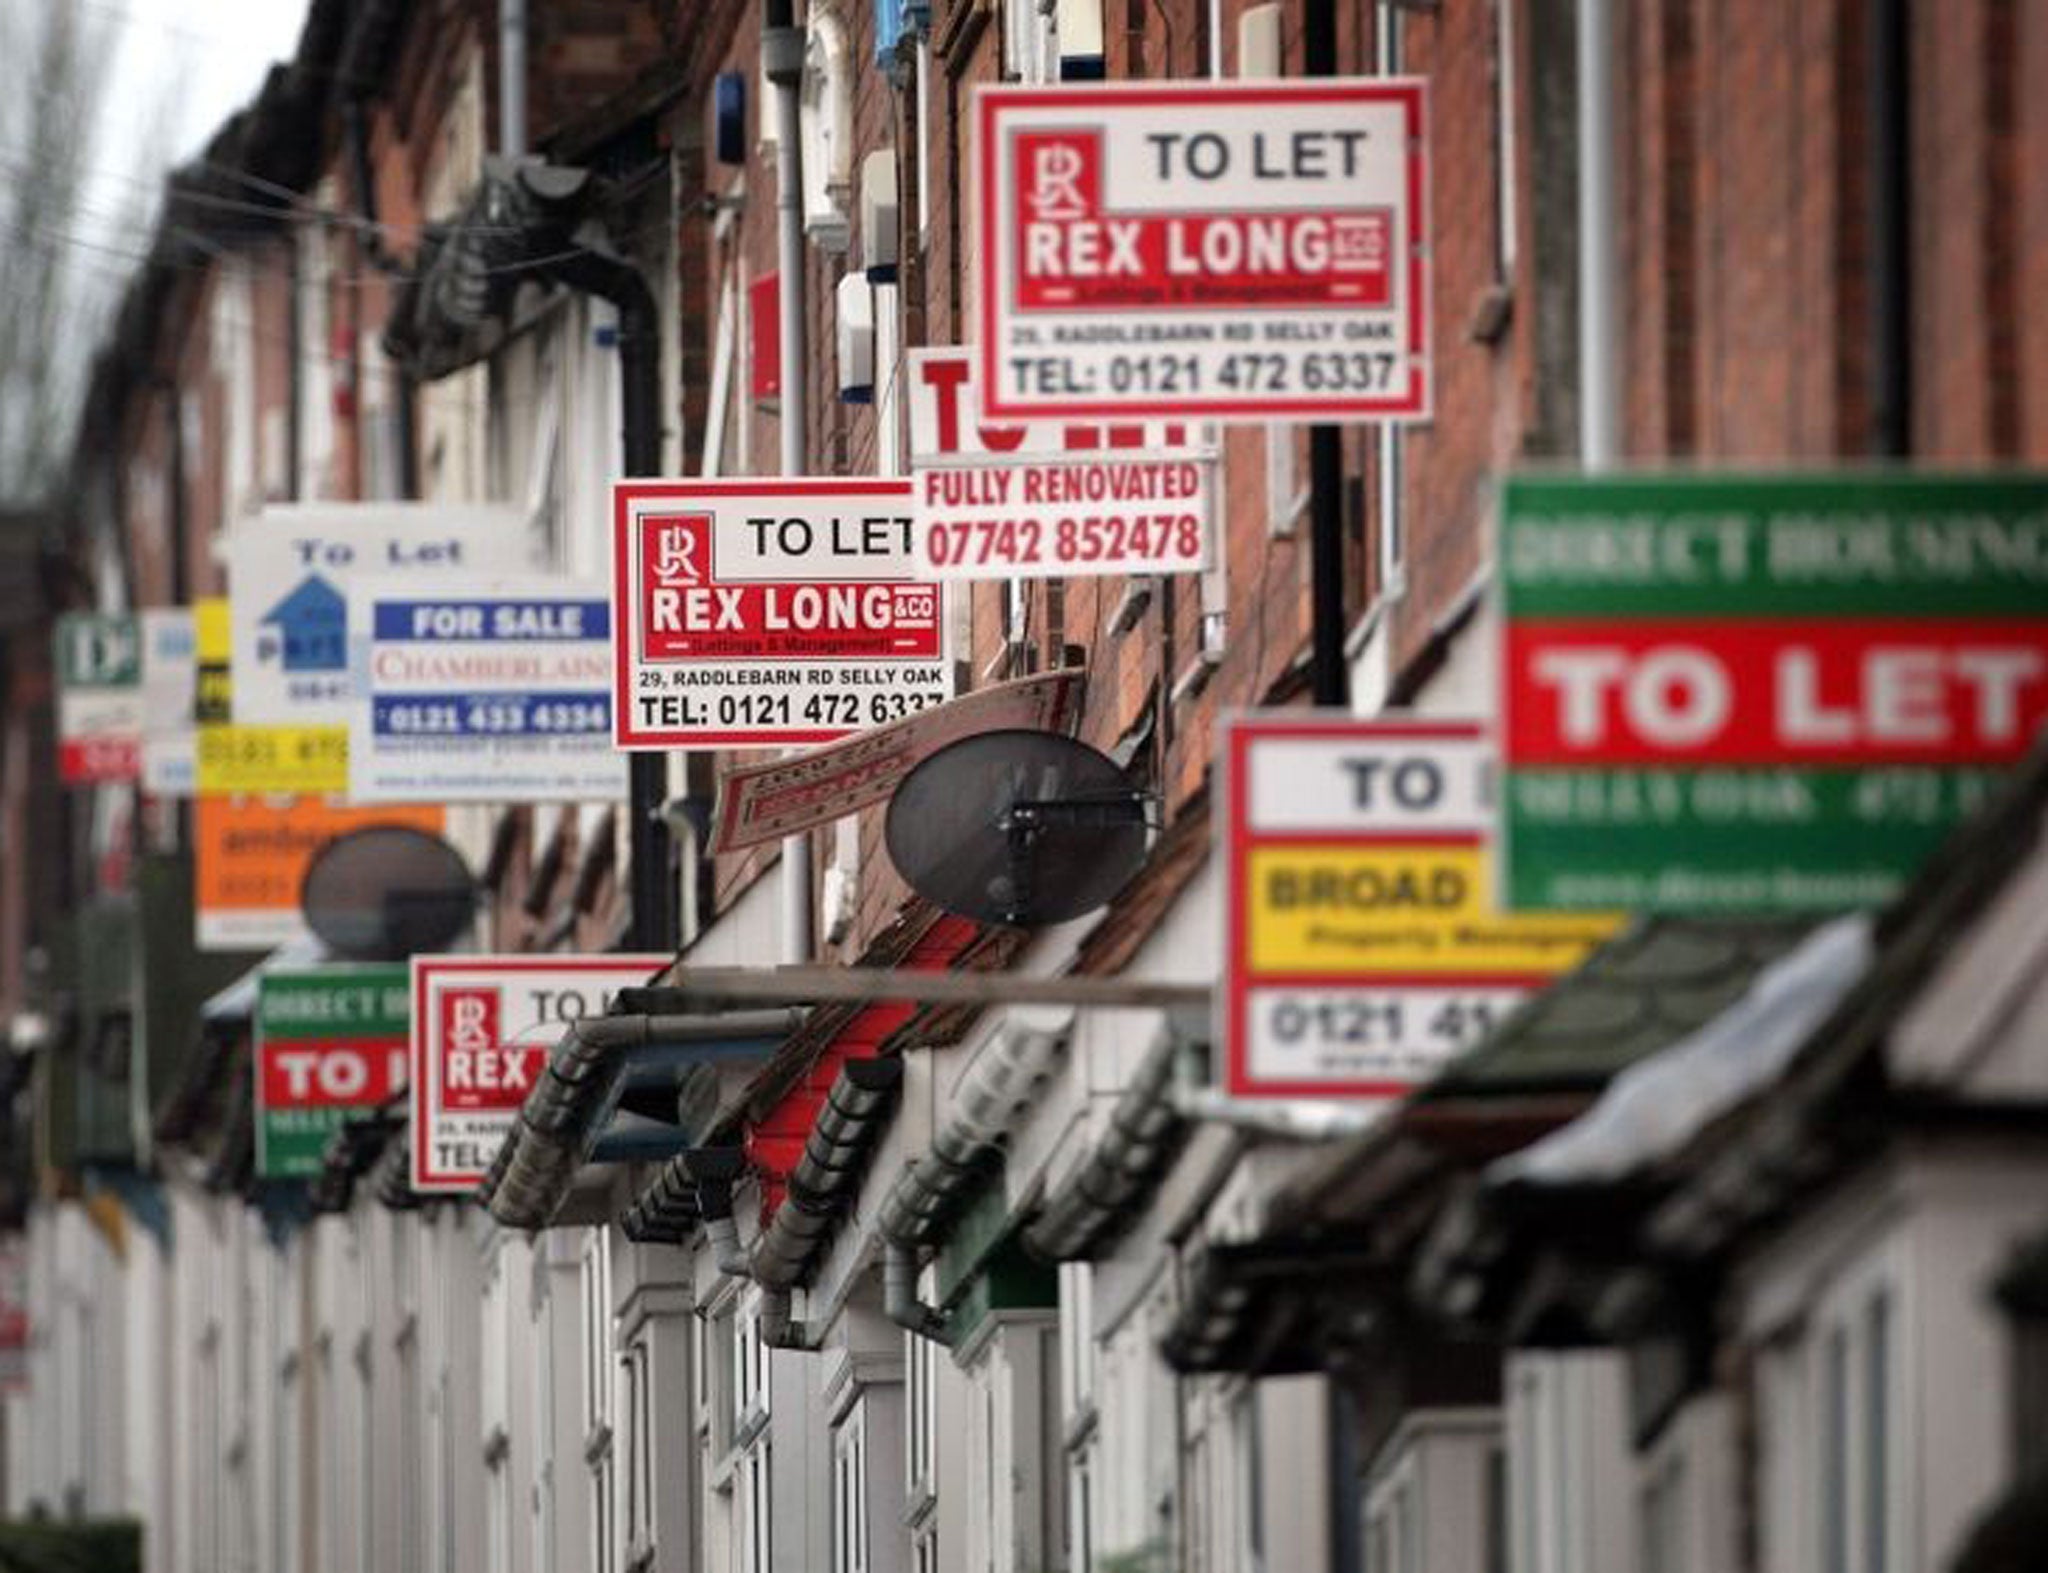 Renters have faced a number of difficulties this year